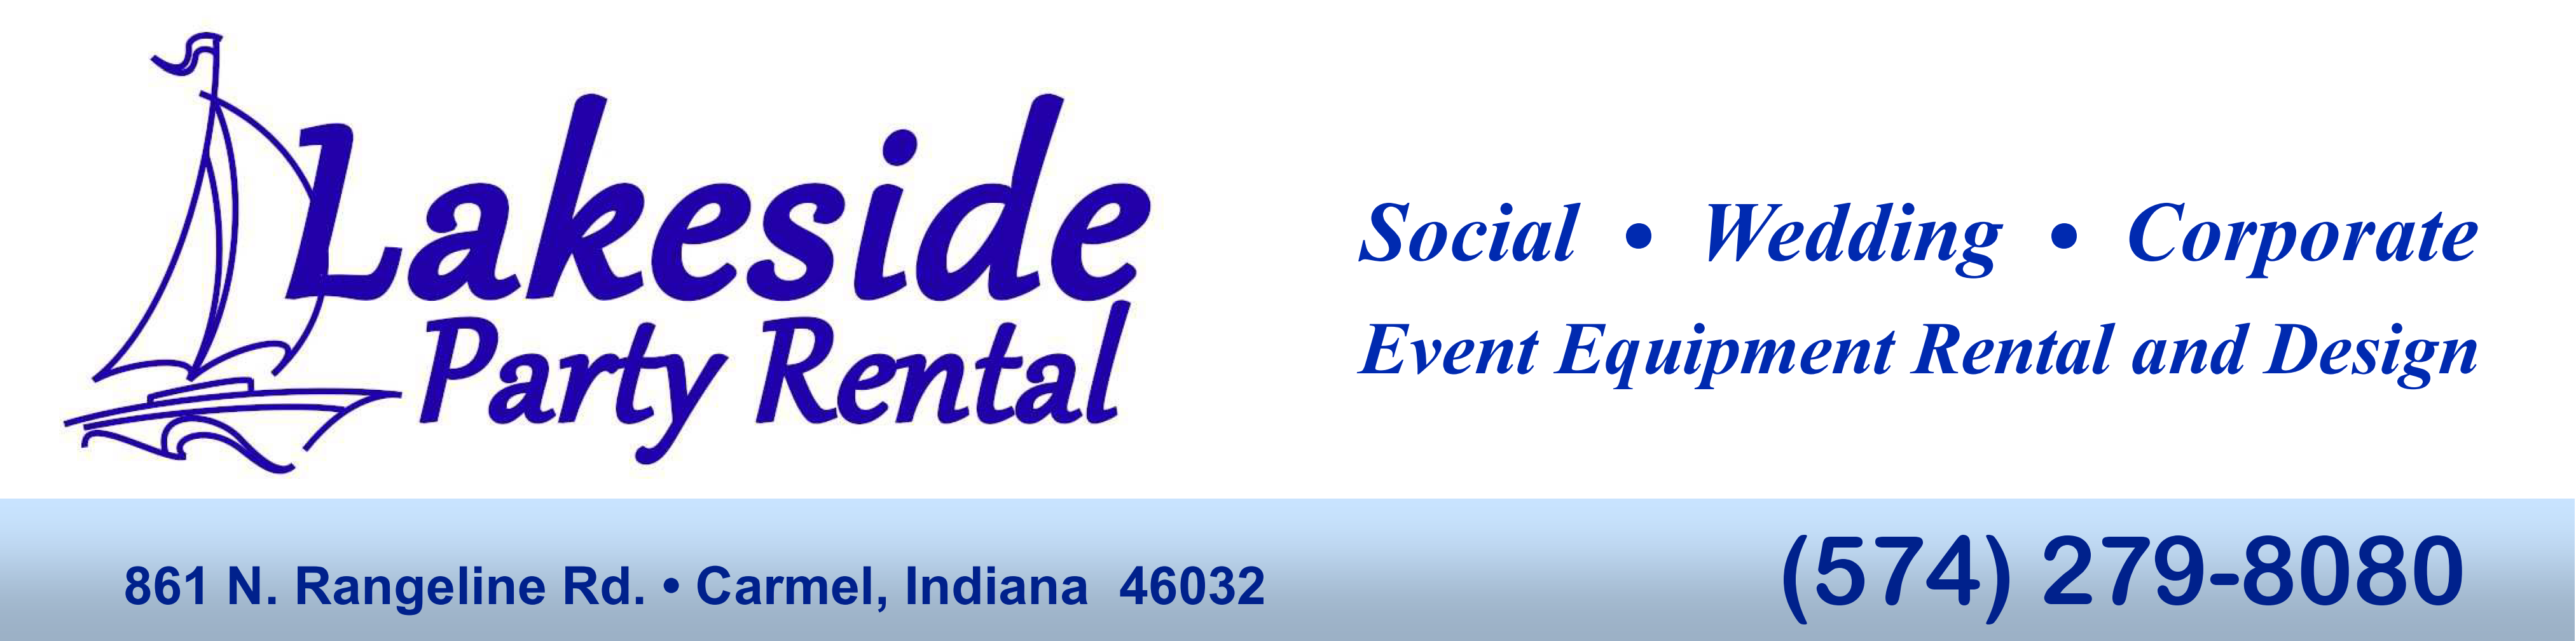 Chair Rental Carmel Indiana - Party Rental Equipment from Lakeside party rental serving North Central Indiana.